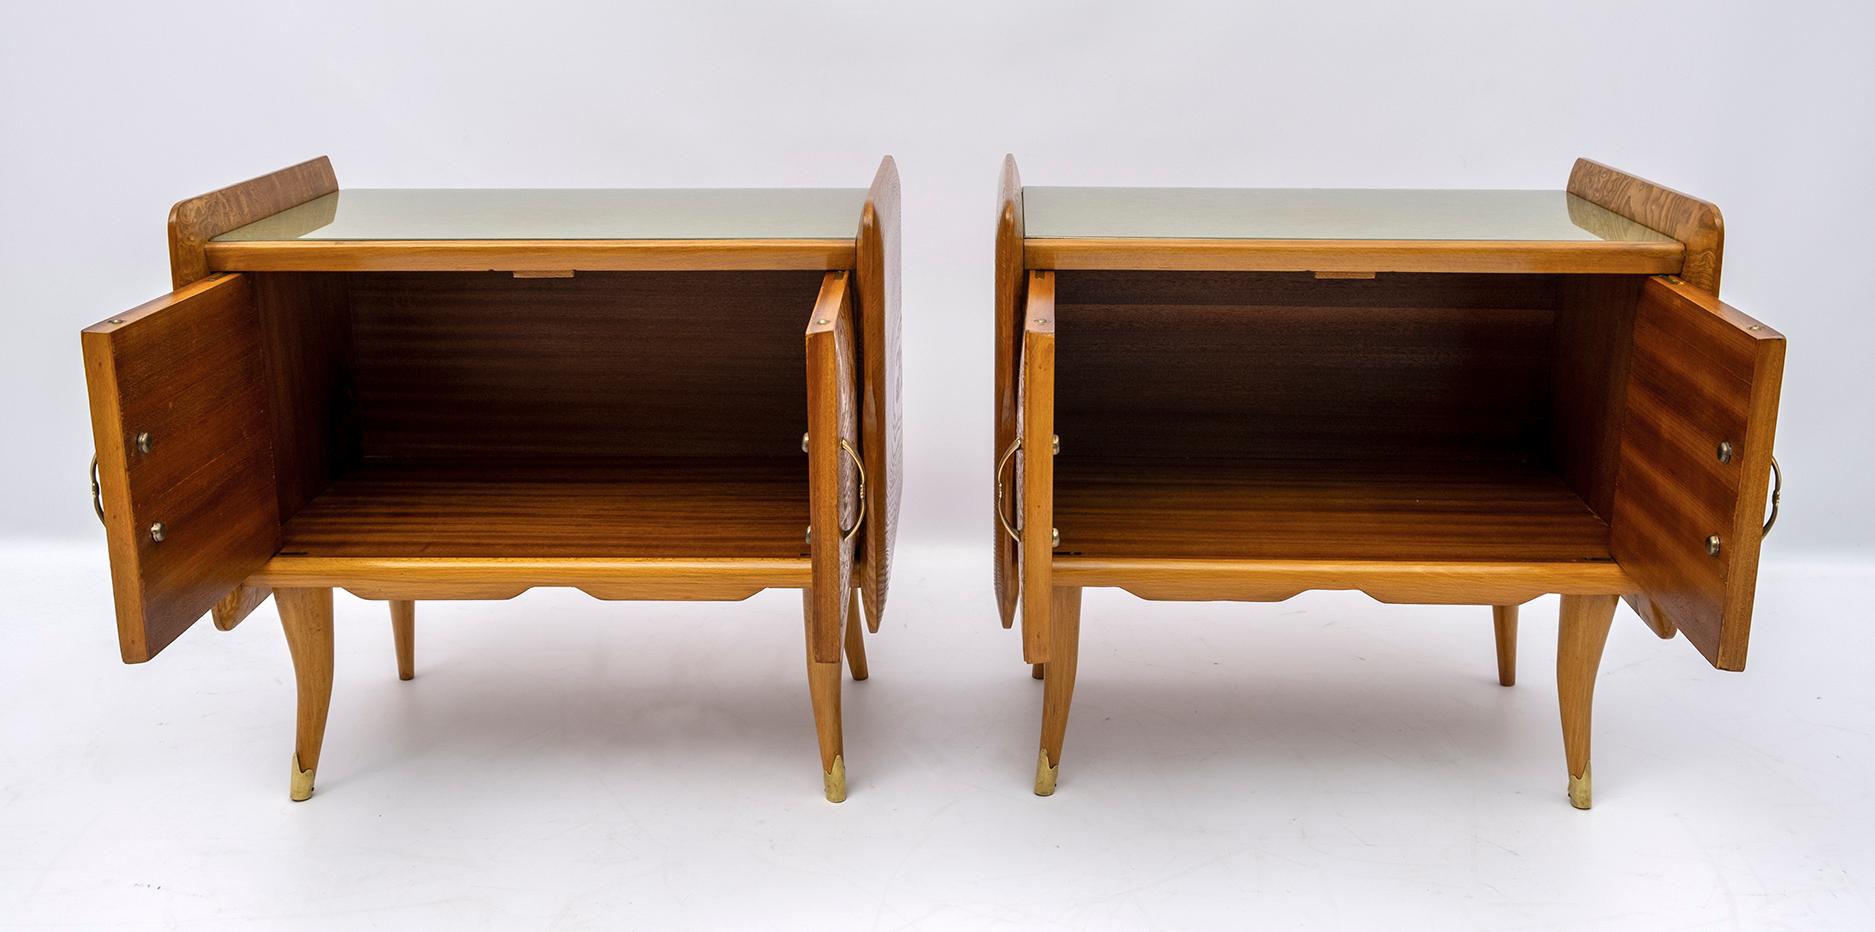 Pair of Art Deco Italian Bedside Tables White Ash Briar, 1920s For Sale 2